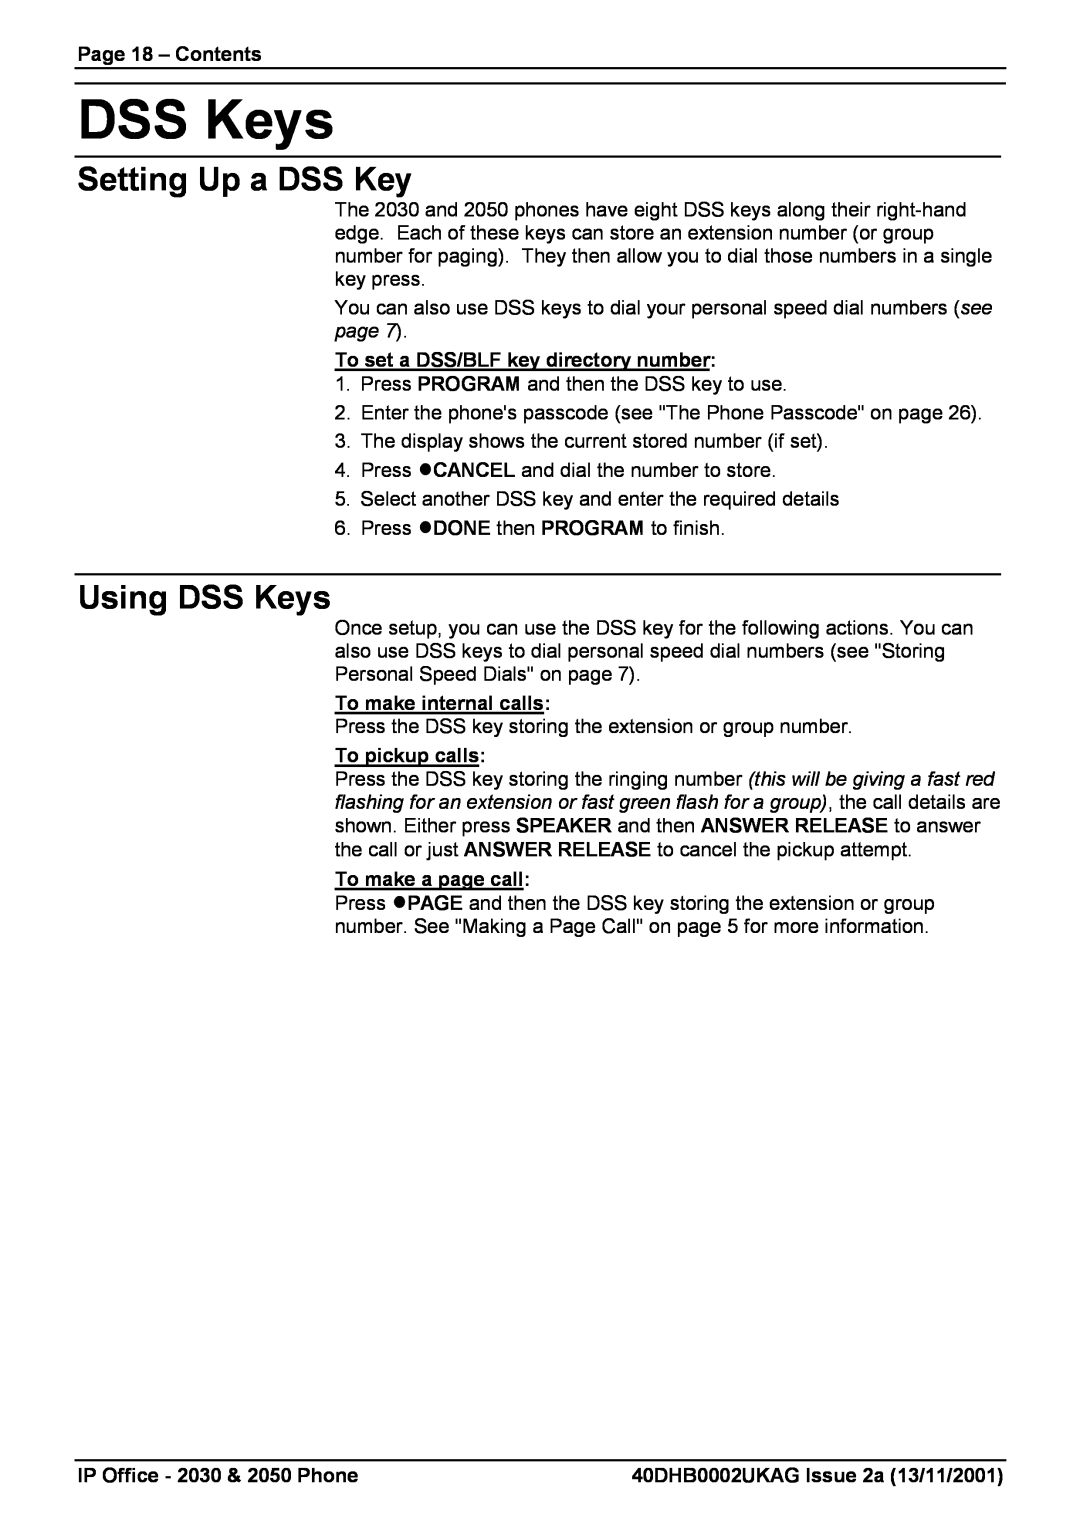 Avaya 2050, 2030 manual Setting Up a DSS Key, Using DSS Keys, Page 18 - Contents, To set a DSS/BLF key directory number 